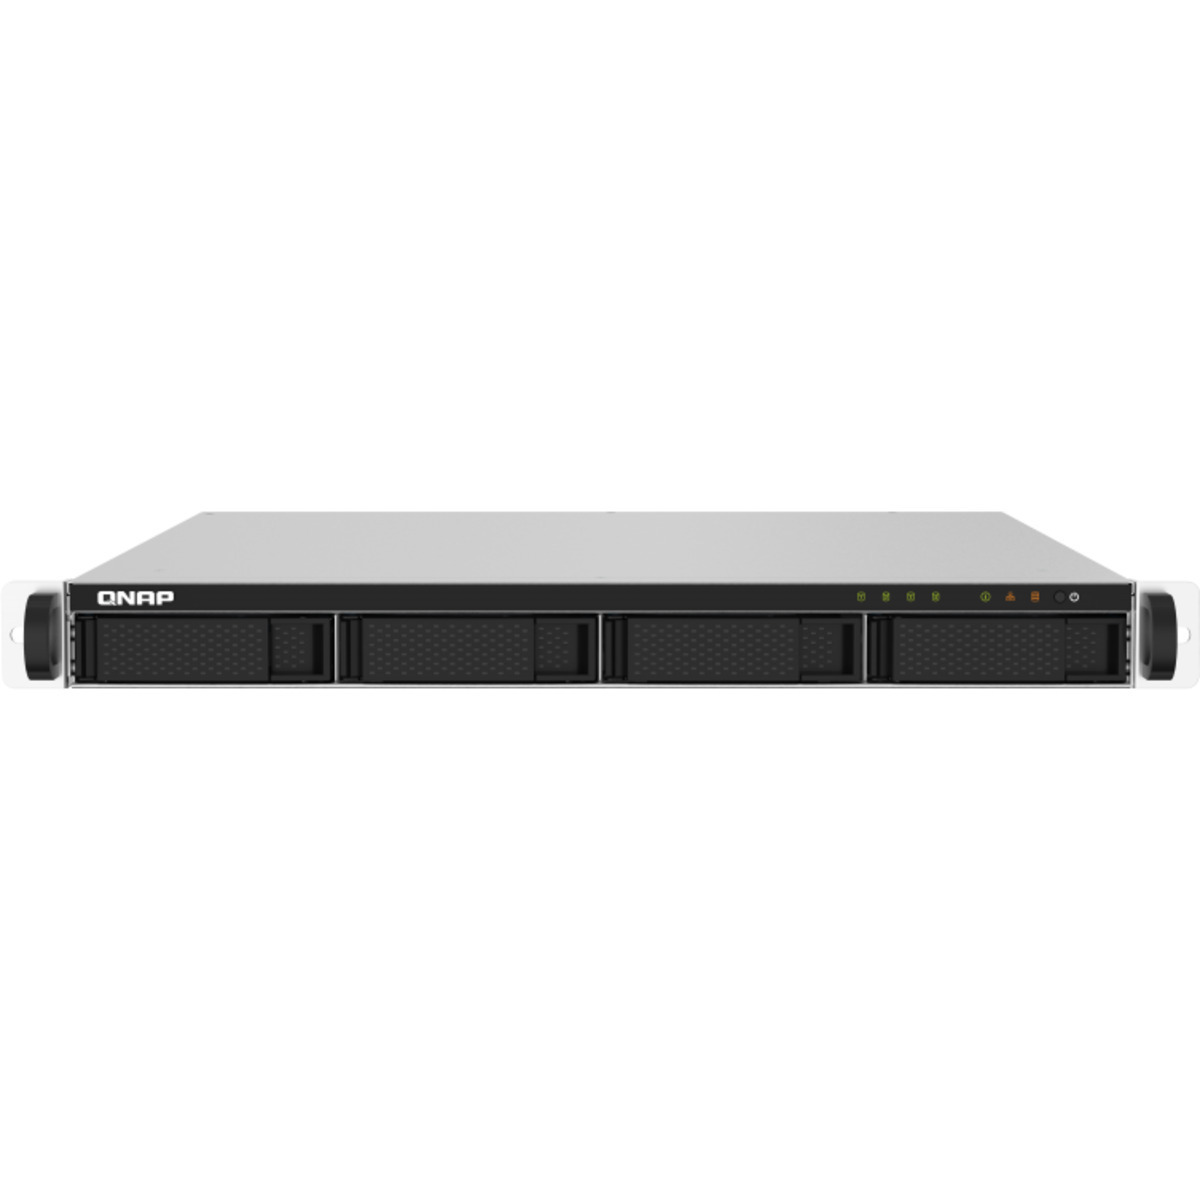 buy $1463 QNAP TS-432PXU 16tb RackMount NAS - Network Attached Storage Device 4x4000gb Western Digital Blue WD40EZRZ 3.5 5400rpm SATA 6Gb/s HDD CONSUMER Class Drives Installed - Burn-In Tested - FREE RAM UPGRADE - nas headquarters buy network attached storage server device das new raid-5 free shipping usa christmas new year holiday sale TS-432PXU